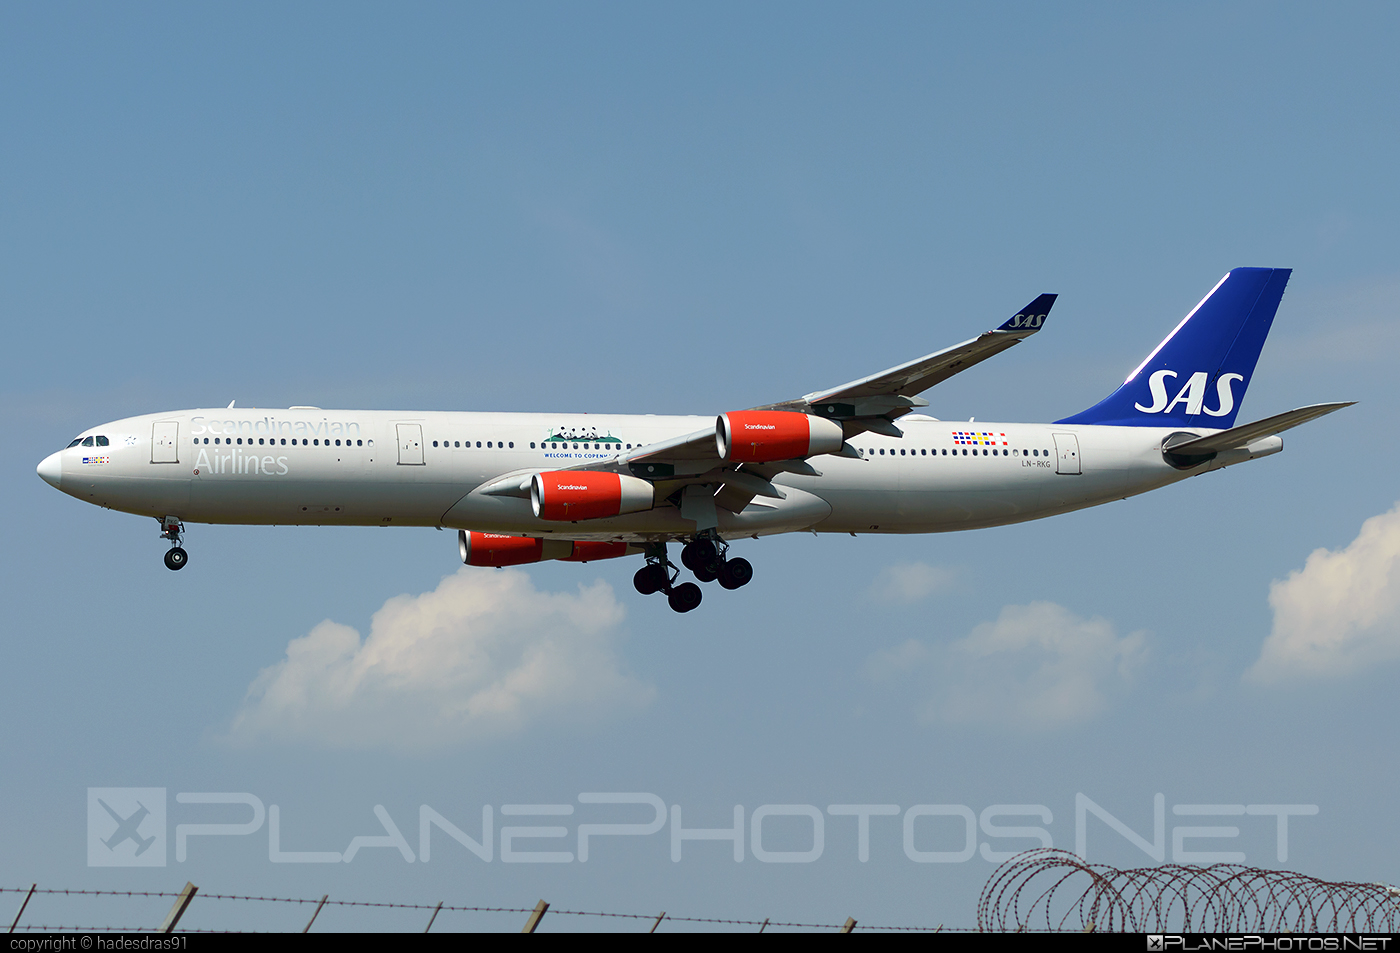 Airbus A340-313E - LN-RKG operated by Scandinavian Airlines (SAS) #a340 #a340family #airbus #airbus340 #sas #sasairlines #scandinavianairlines